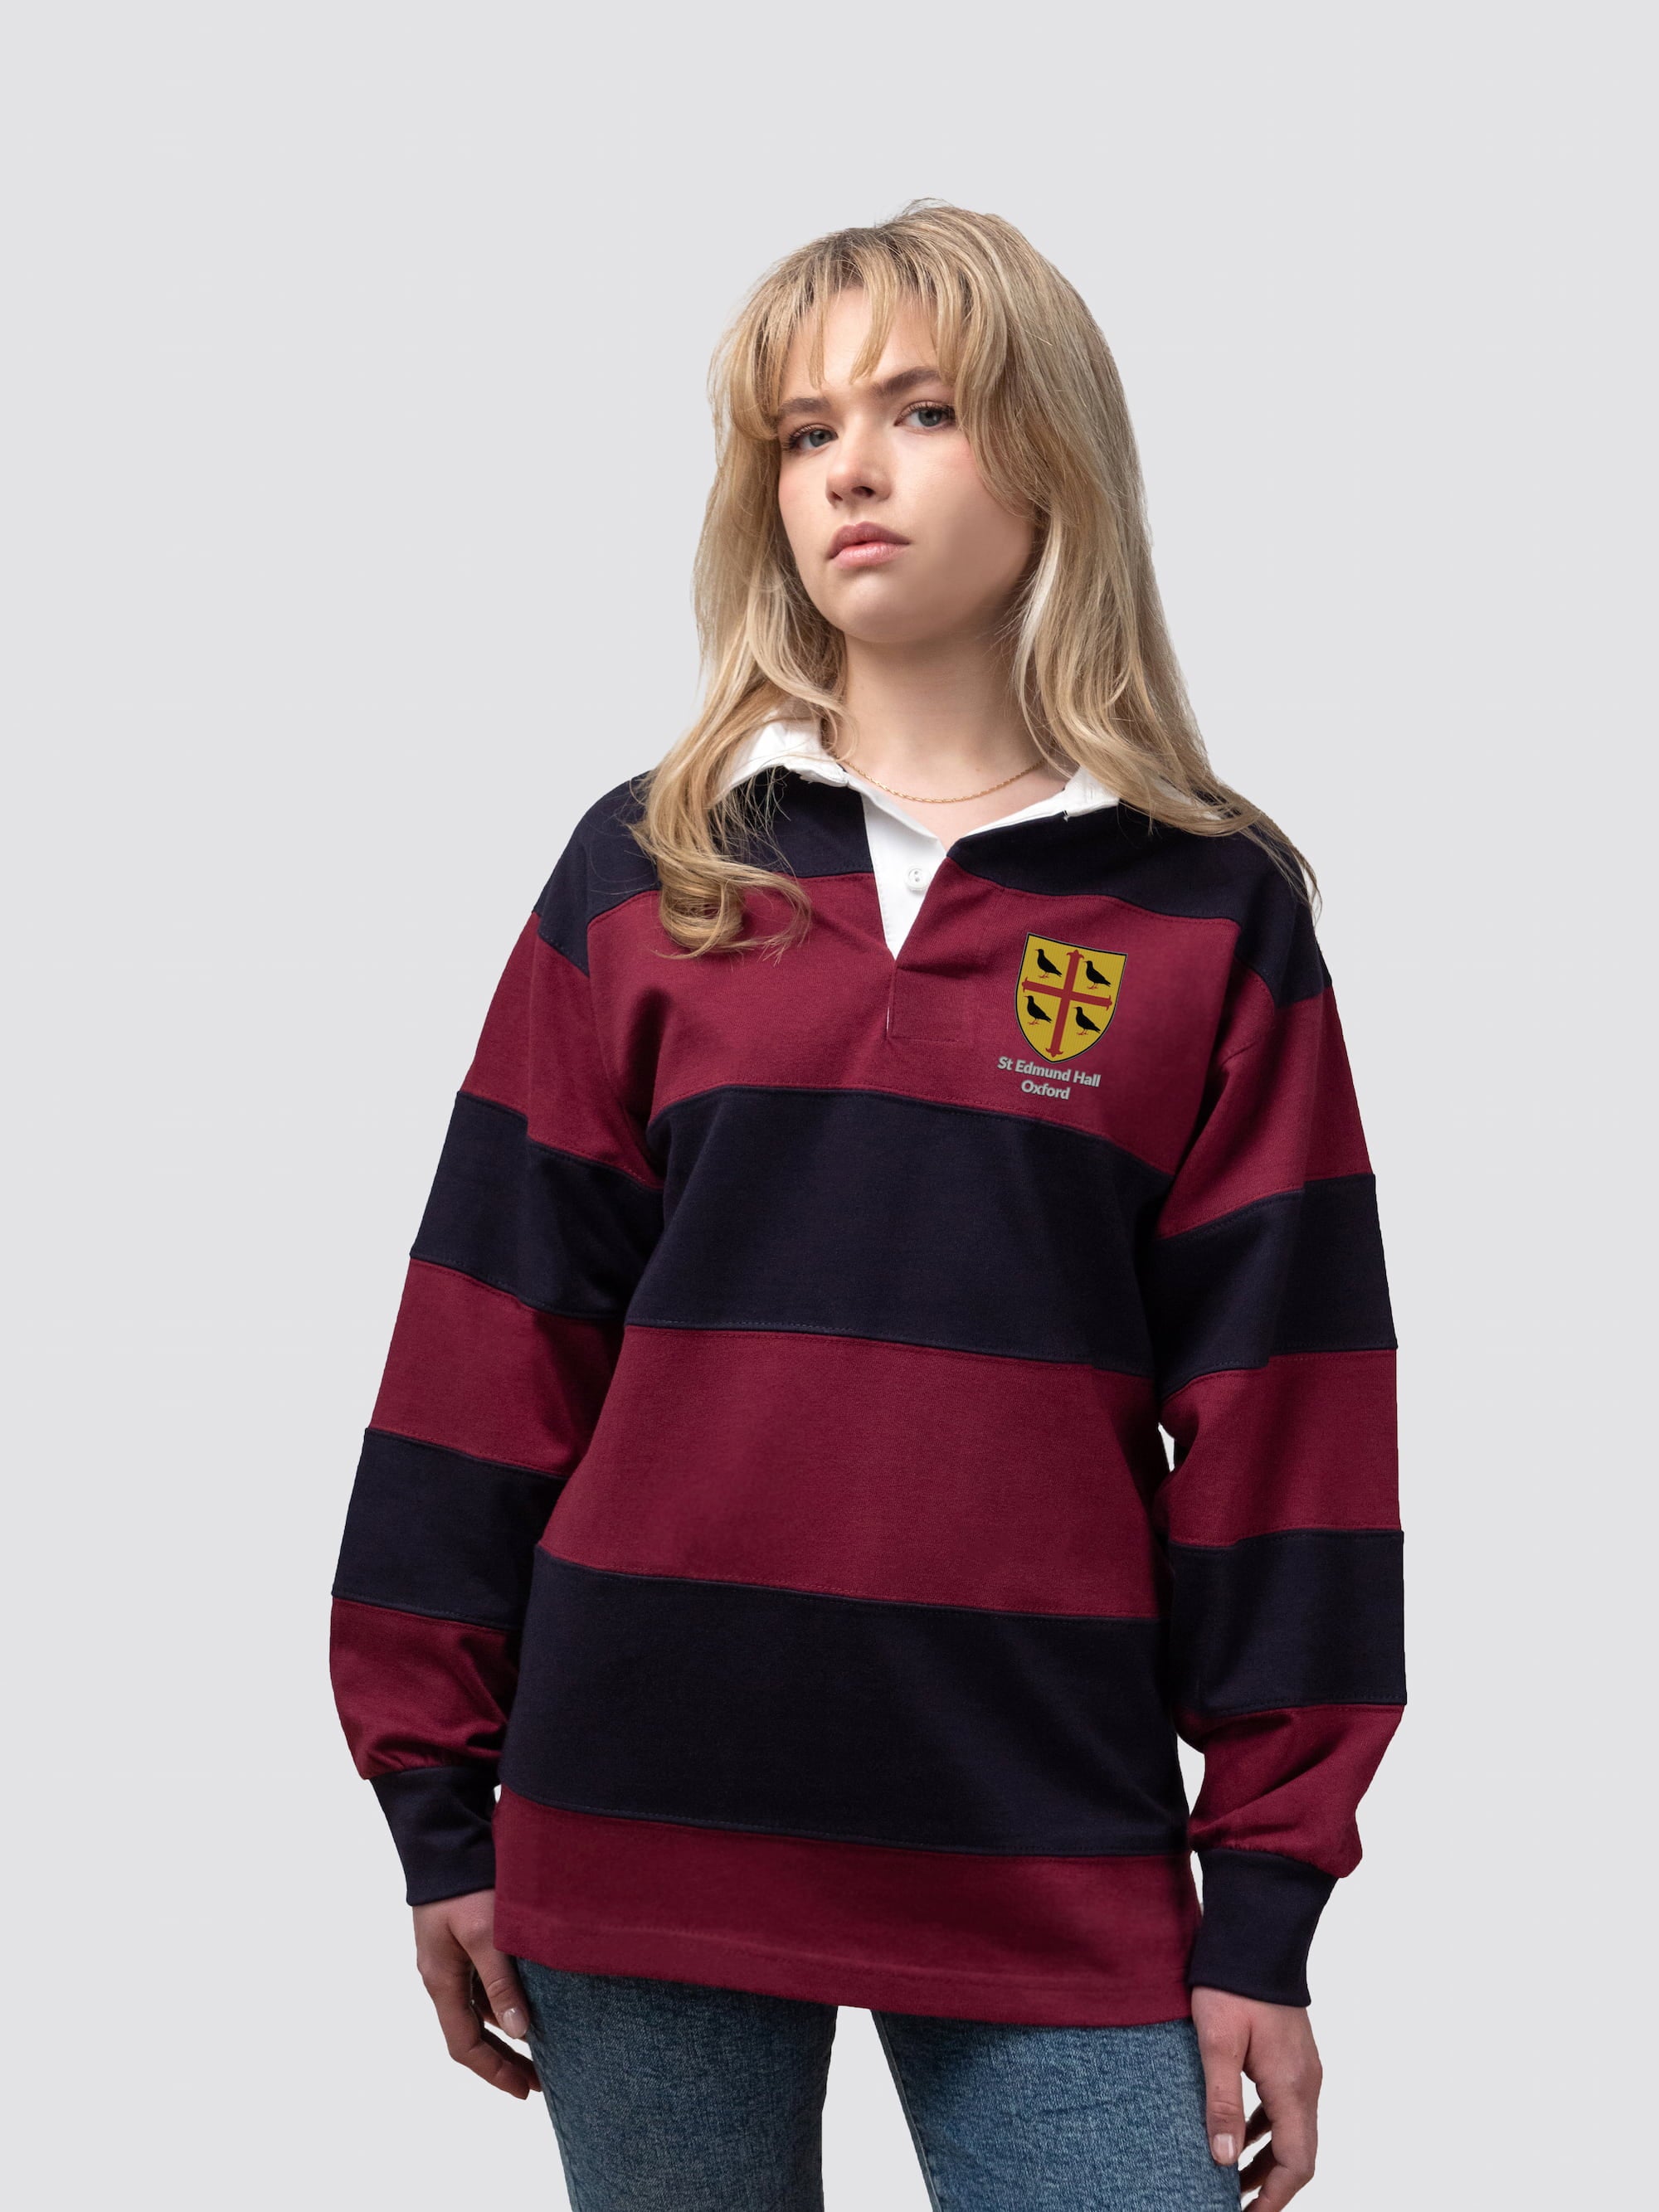 St Edmund Hall College rugby shirt, with burgundy and navy stripes